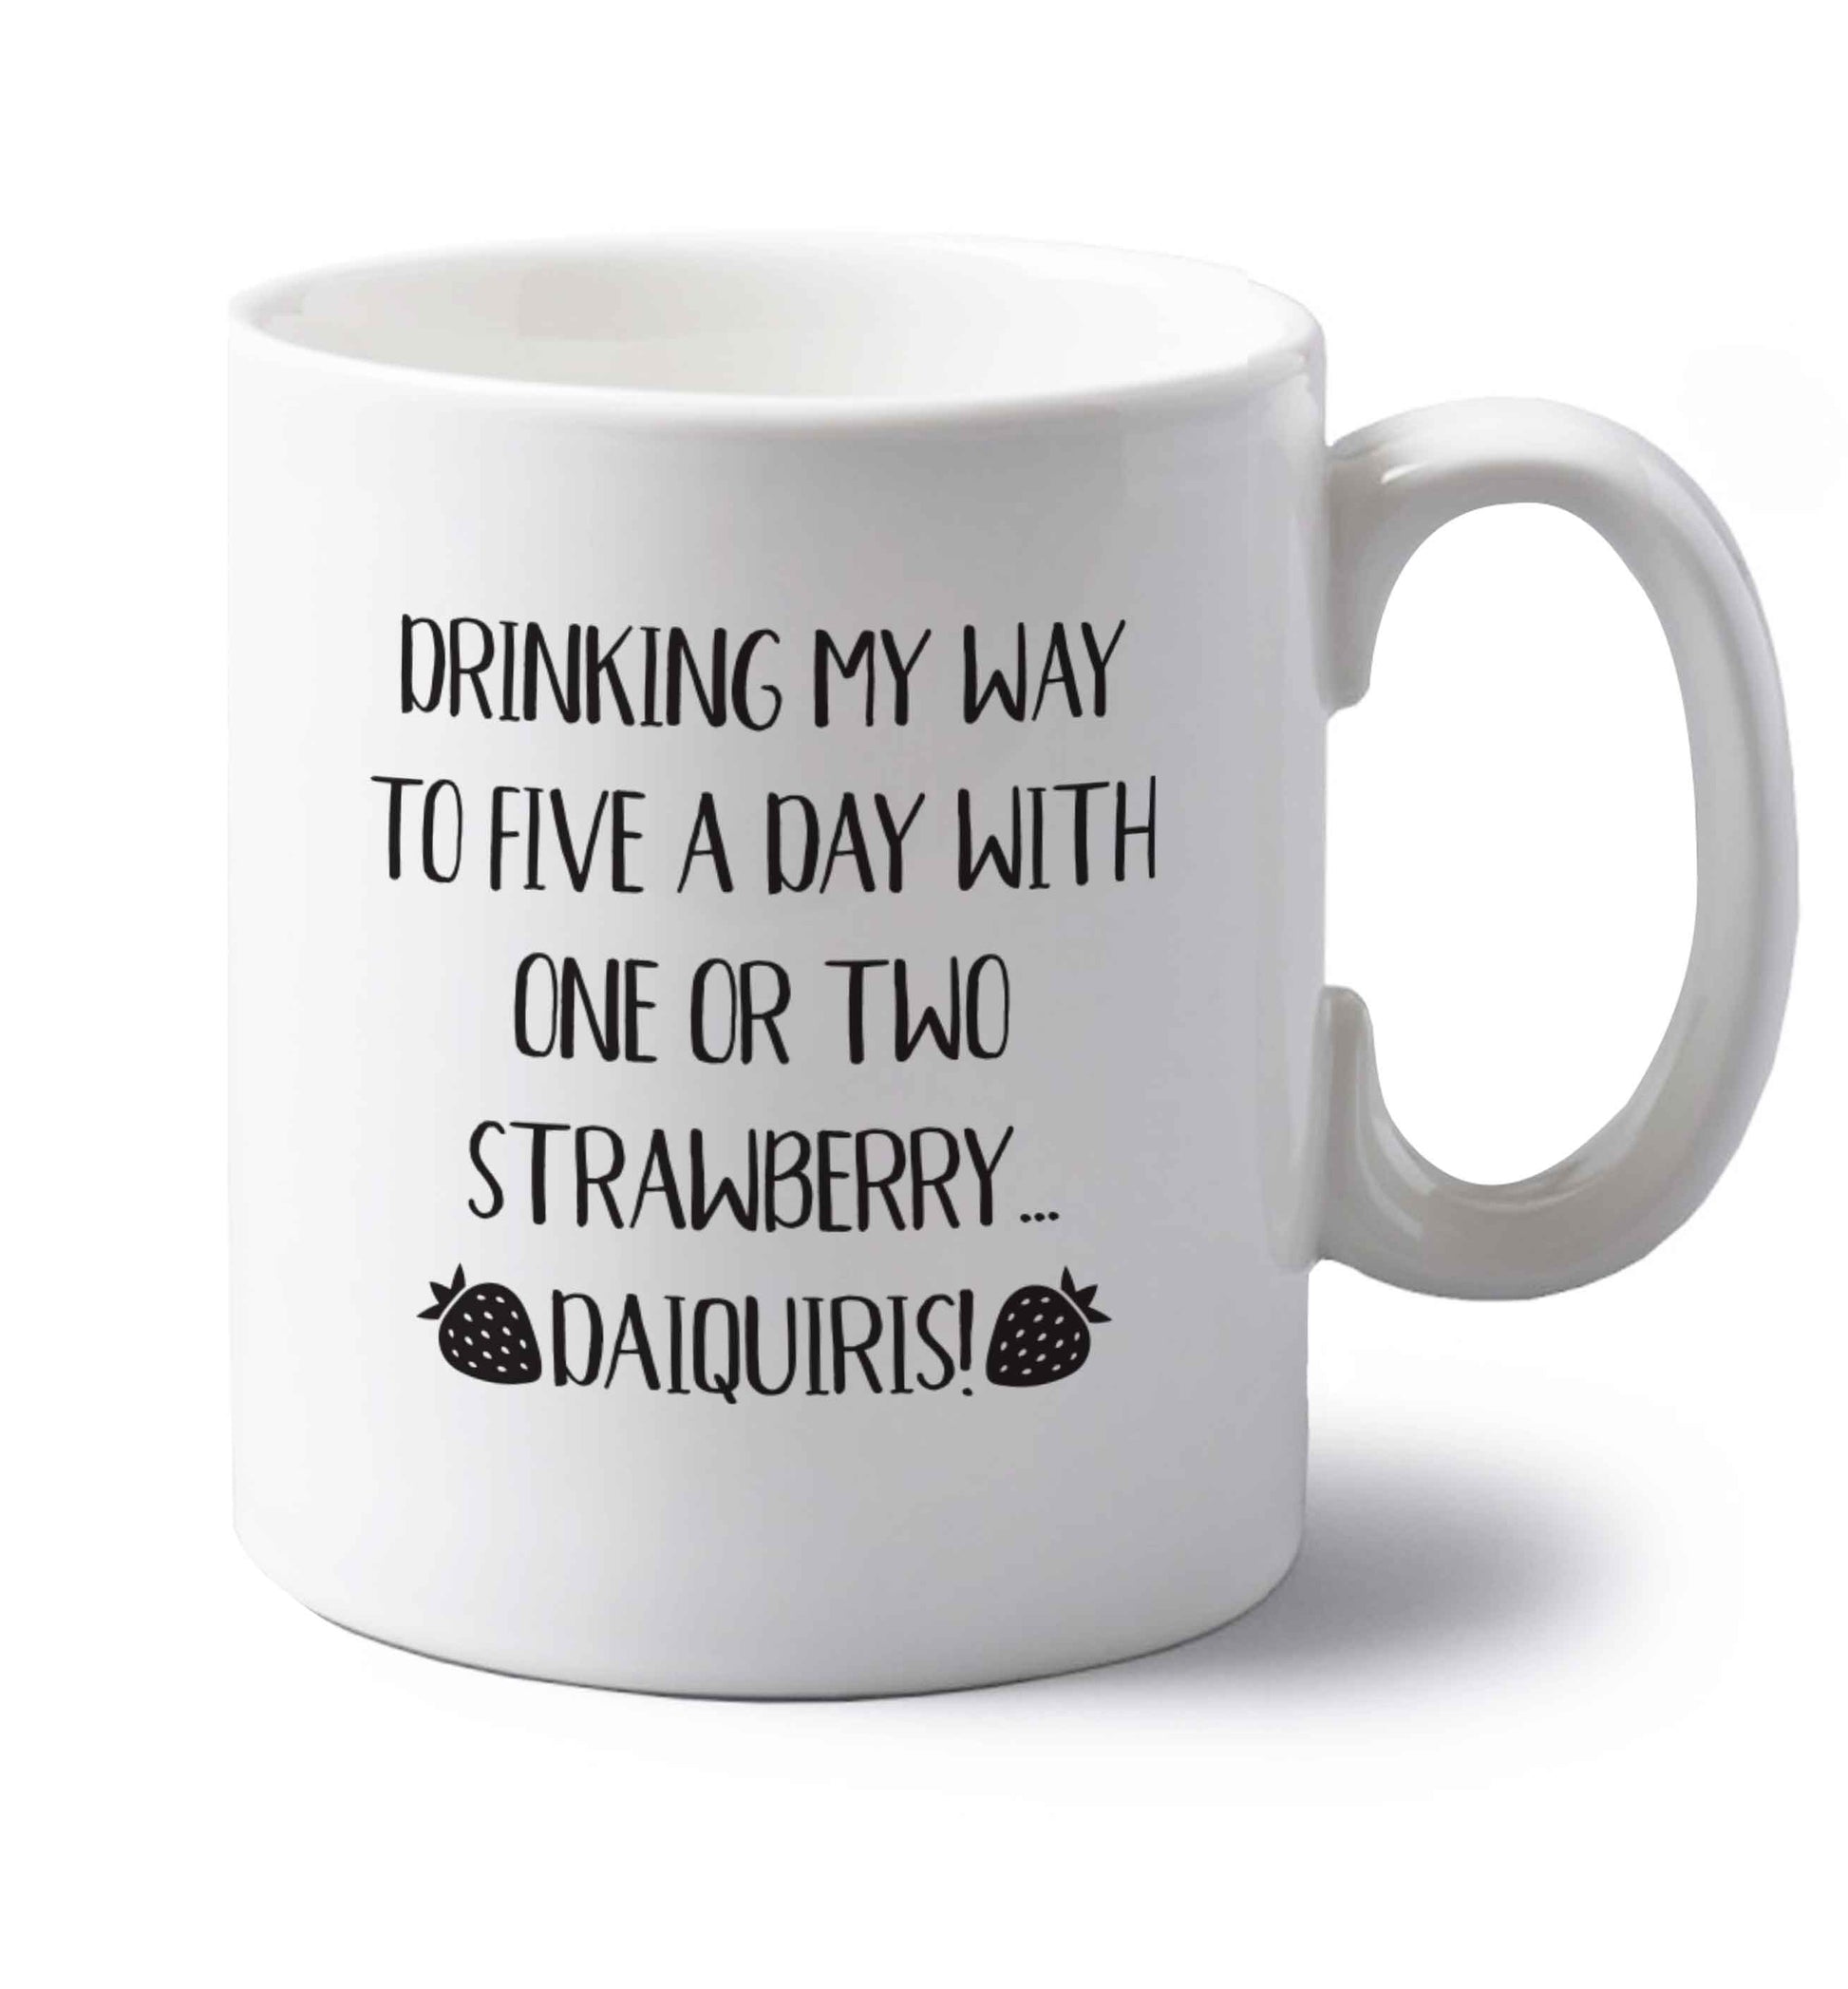 Drinking my way to five a day with one or two straberry daiquiris left handed white ceramic mug 